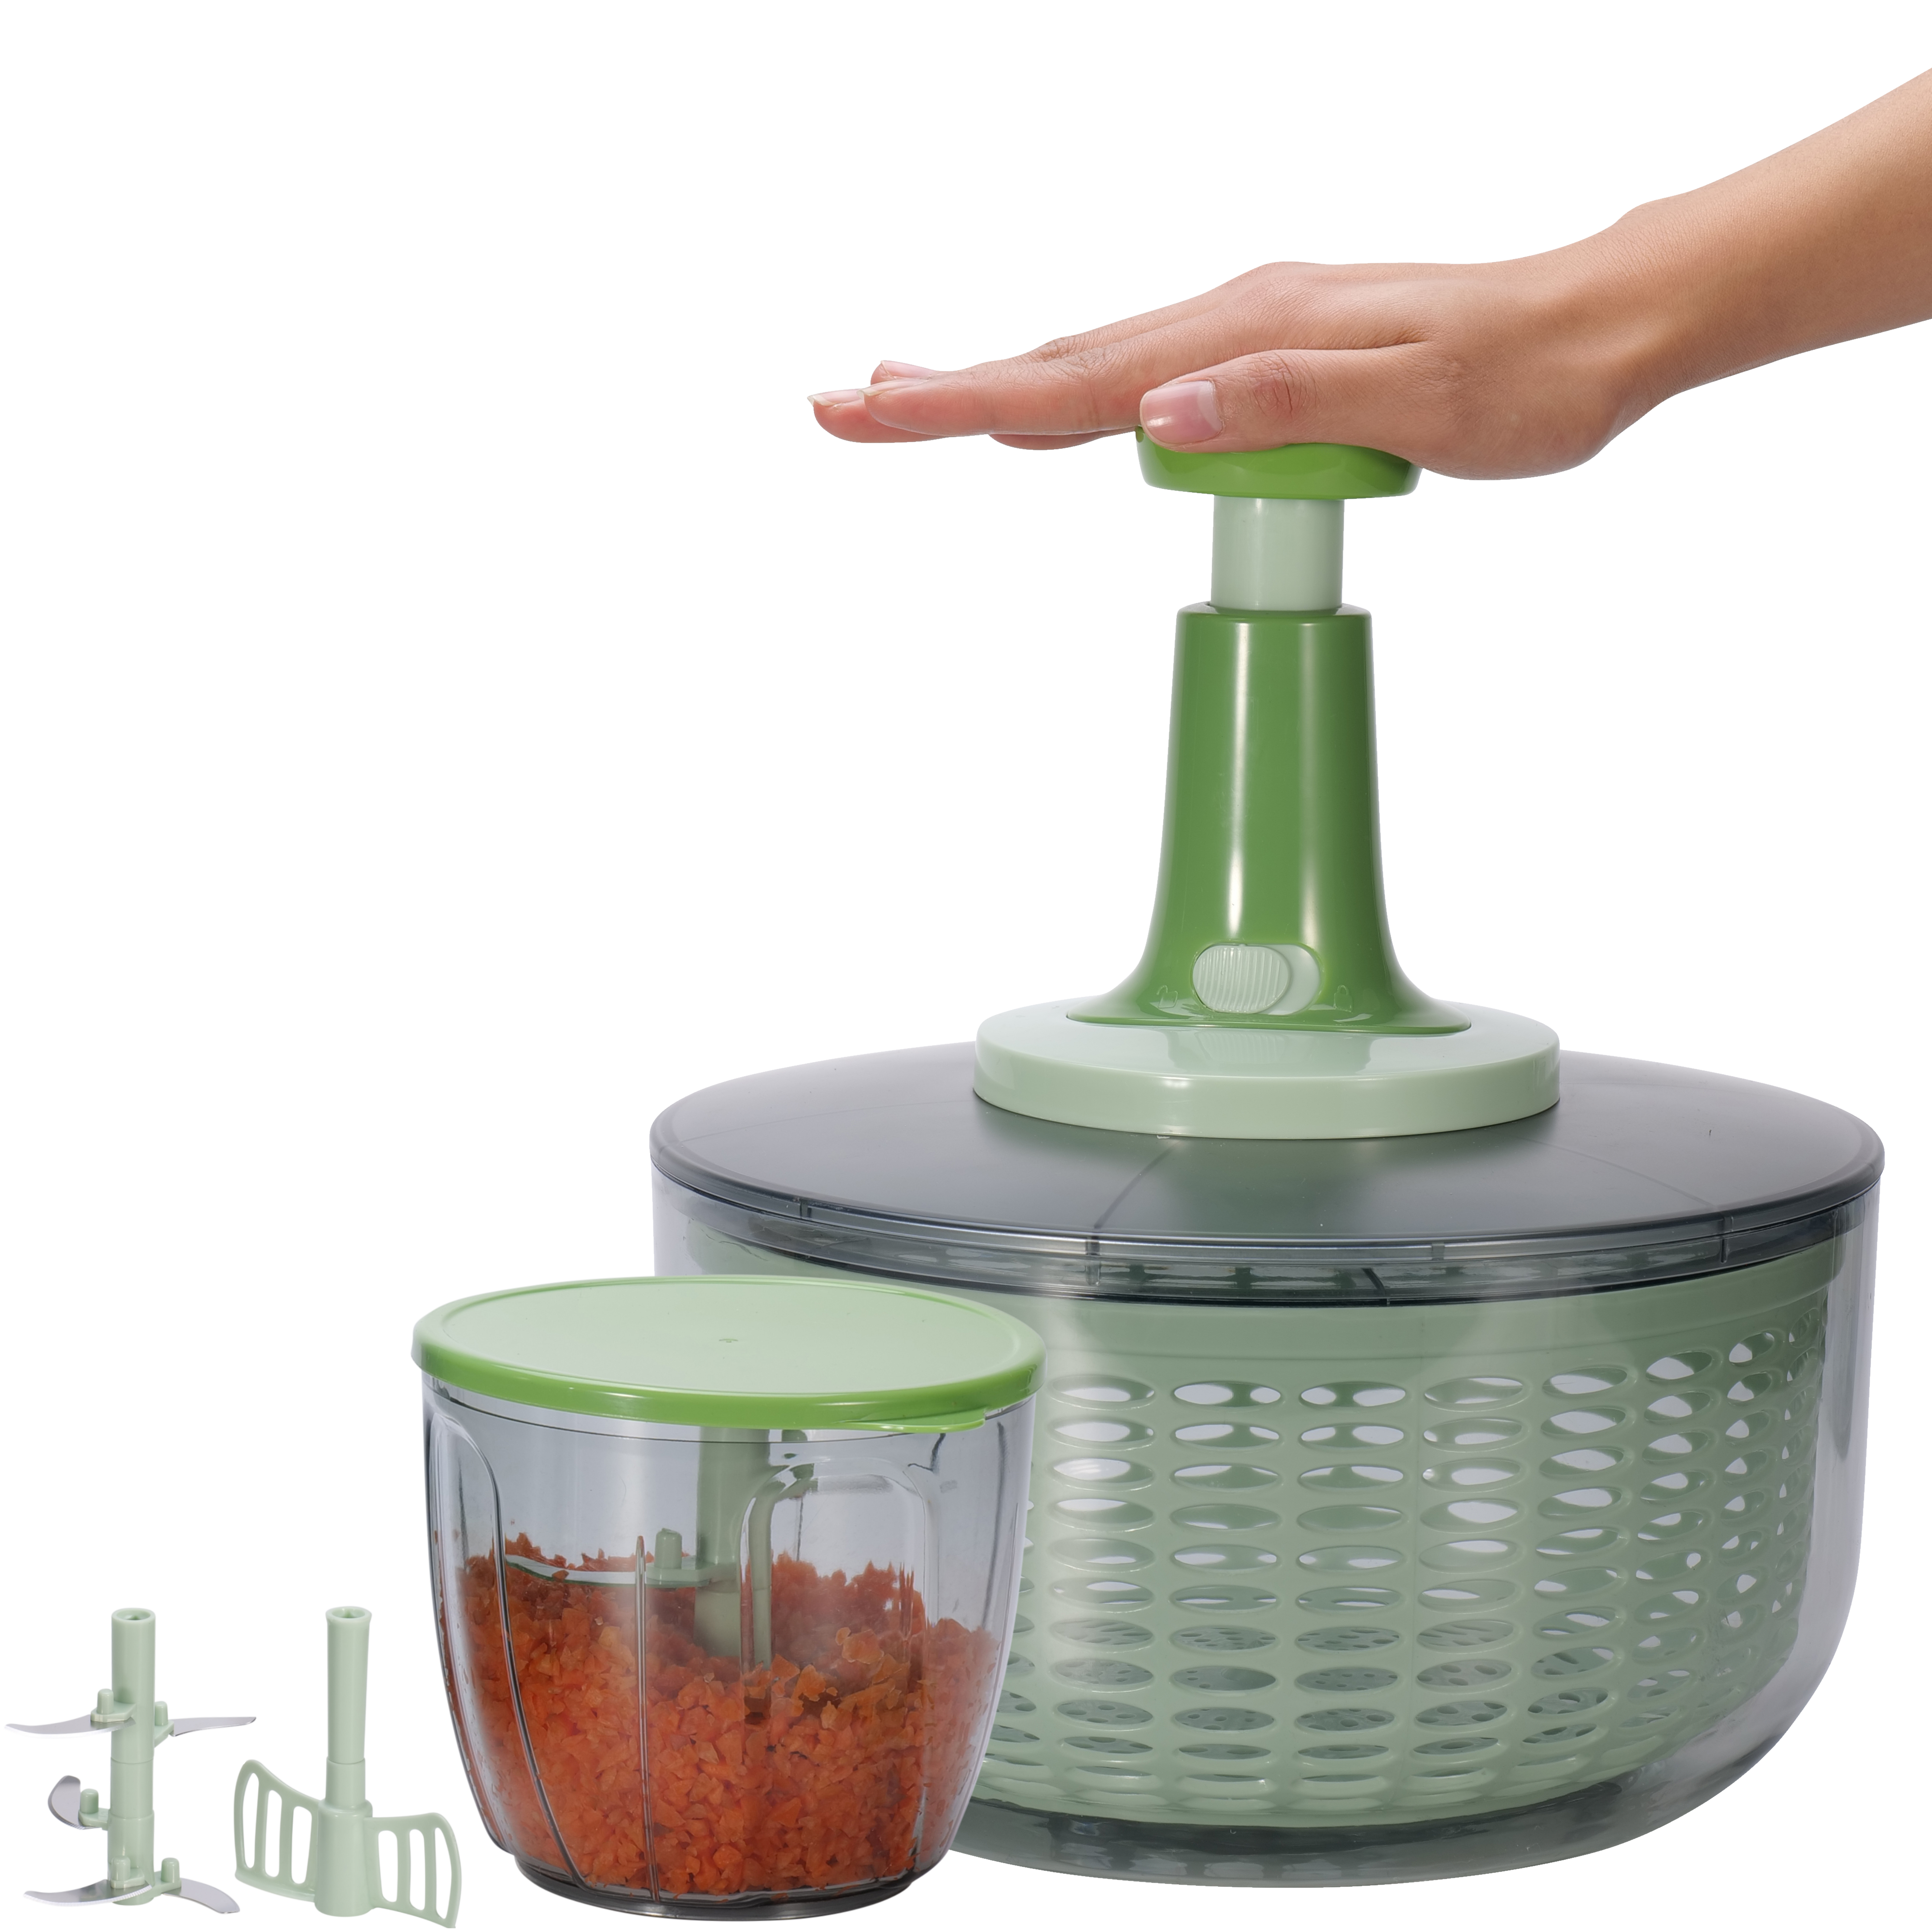 Introducing the Brieftons Express Food Chopper (BR-EX-03) - The